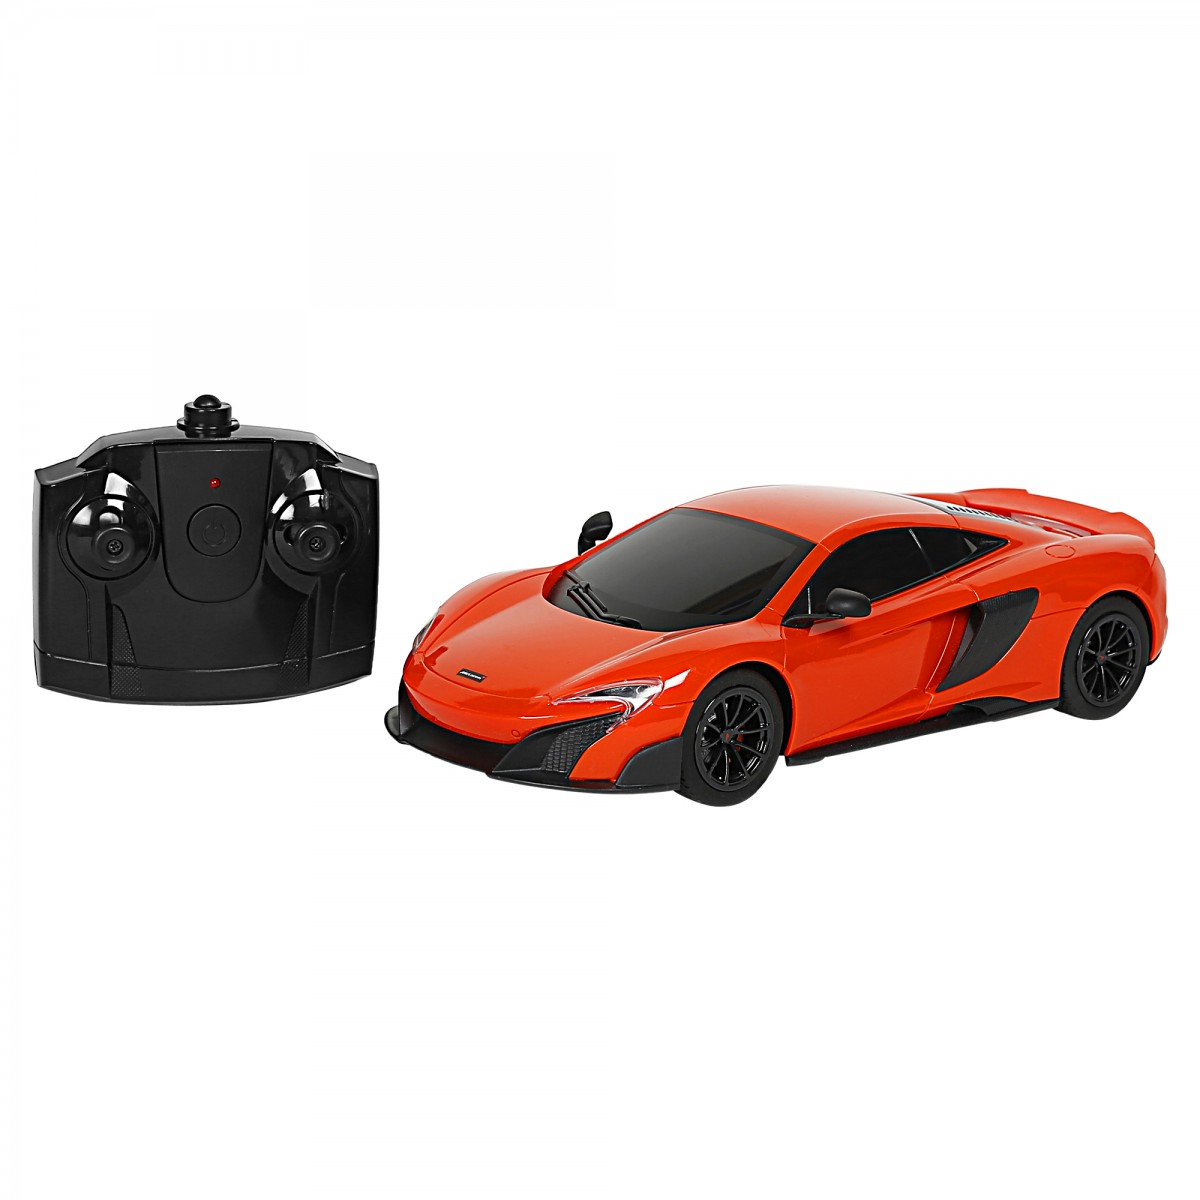 Ralleys McLaren 675LT Coupe Remote Control Car for Kids, Red, 6Y+